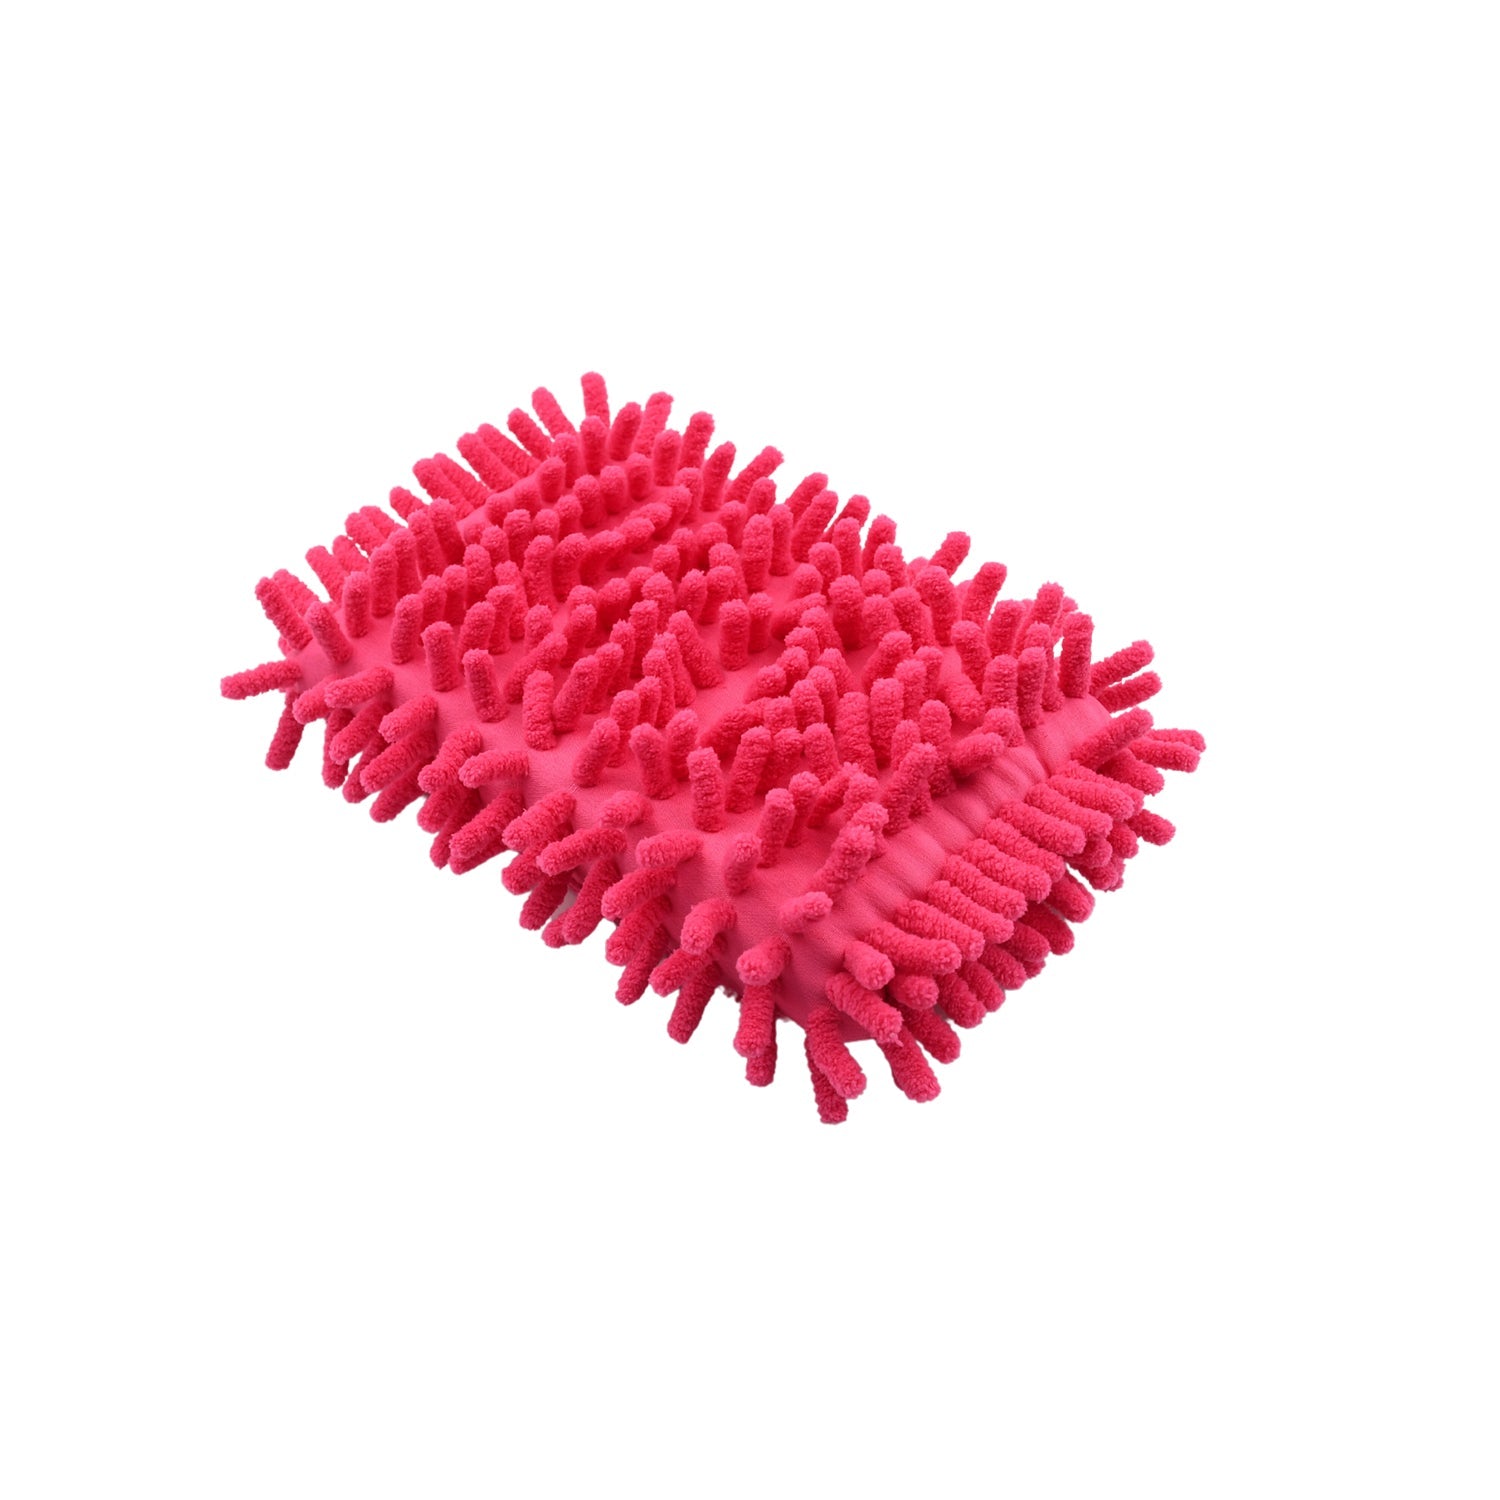 0668a Multipurpose Microfiber Duster Whiteboard Eraser  Washable Dry Eraser Board Eraser Cleaning Sponge for Chalk, Classroom Teacher Supplies, Home and Office, Car Washing Scratch-Free Microfiber Brushes